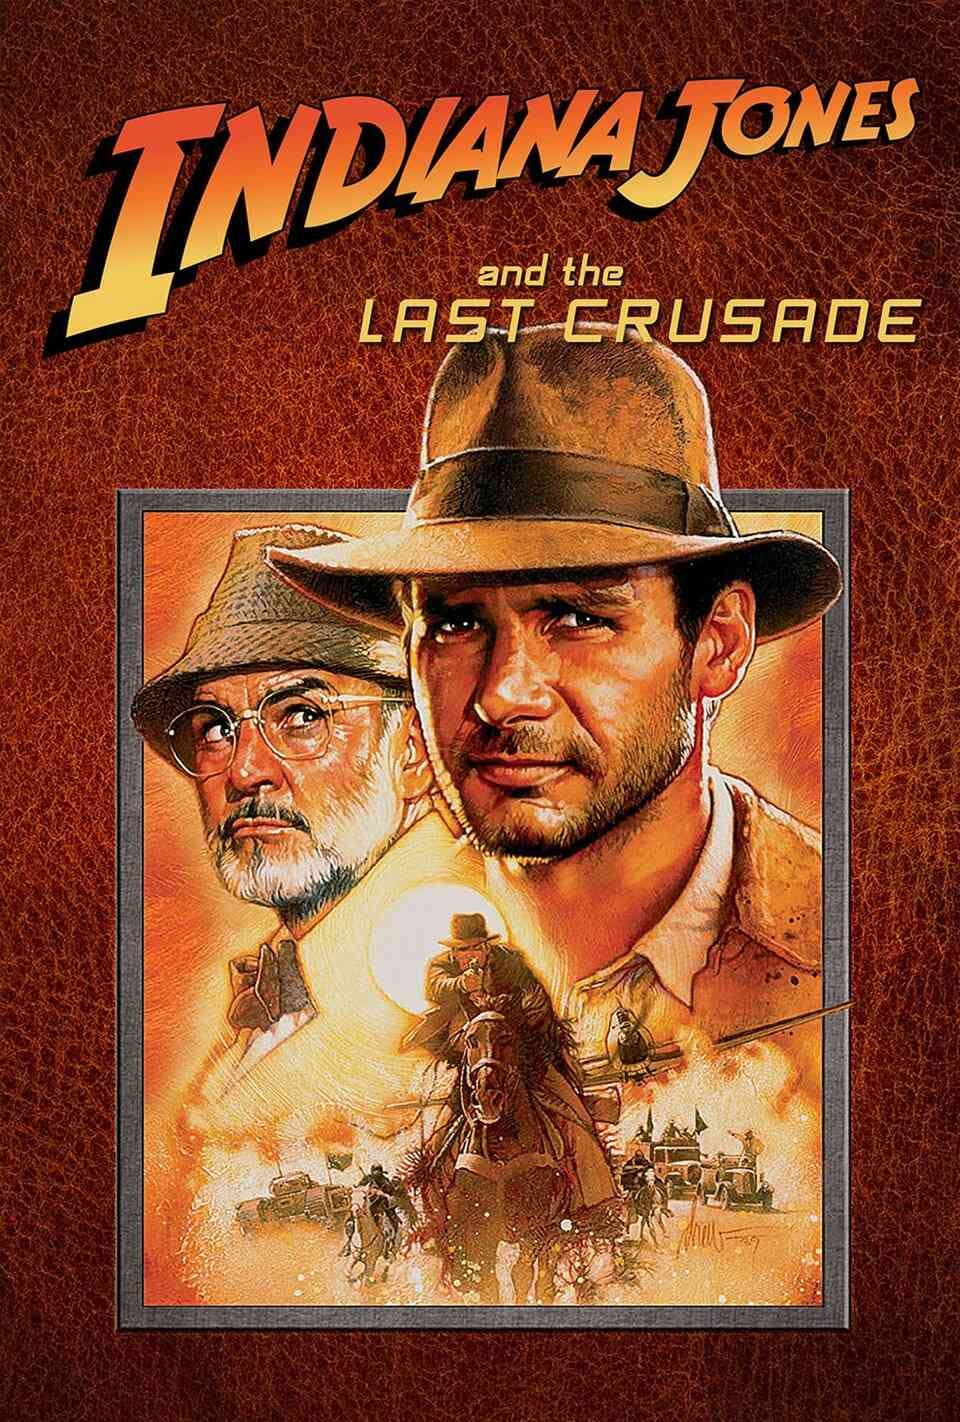 Read Indiana Jones and the Last Crusade screenplay (poster)